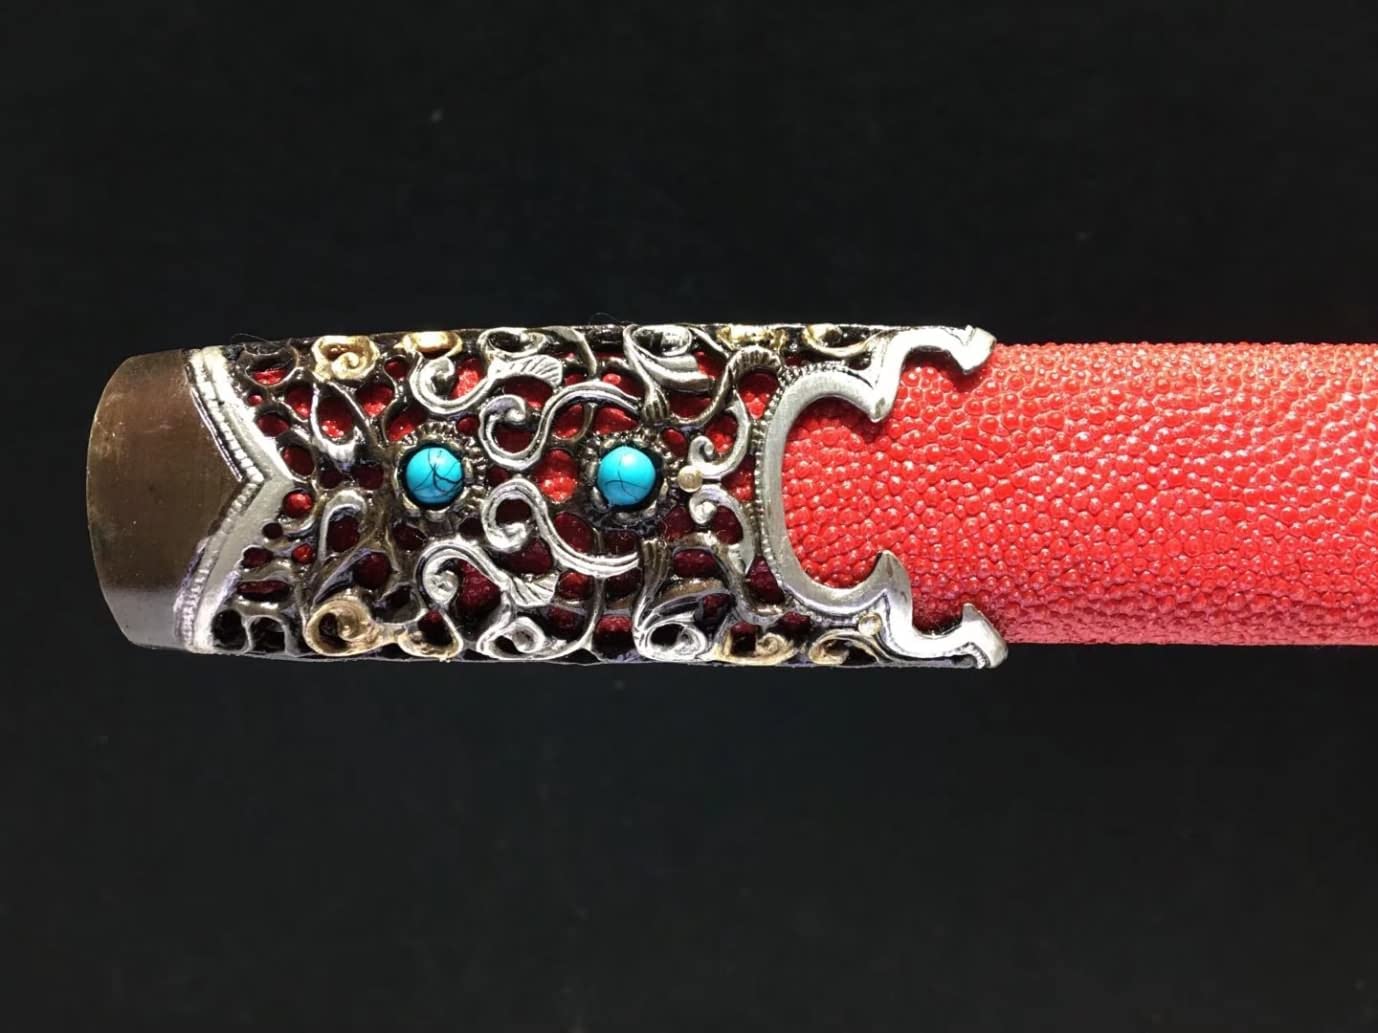 Rosefinch Sword,Forged Damascus Steel Blade,Red Skin Scabbard,CHINESE SWORD